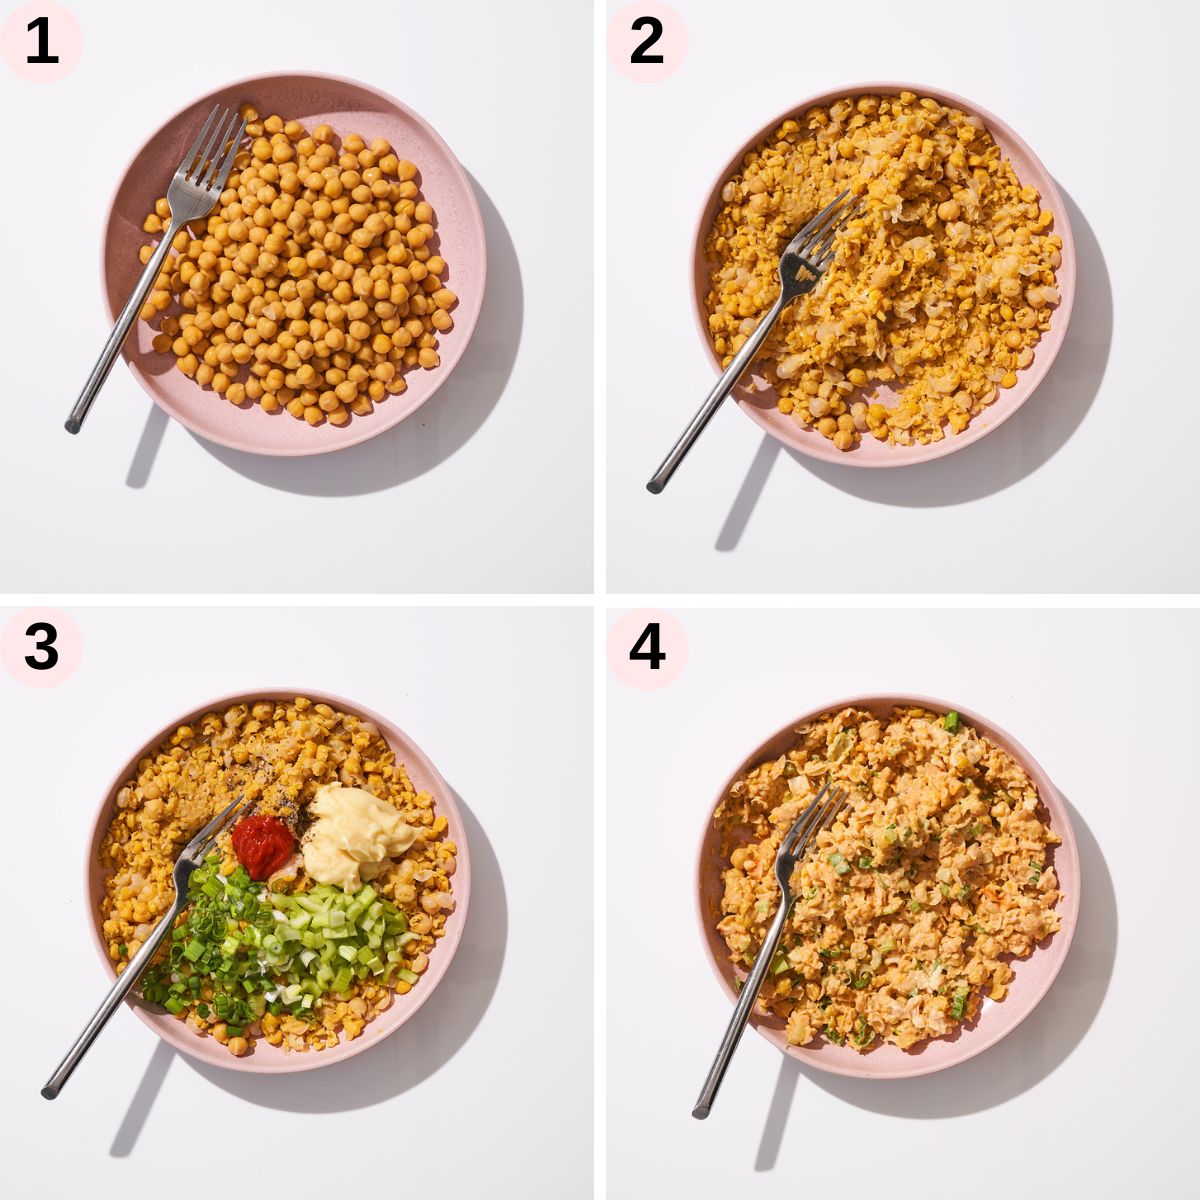 Chickpea salad steps 1 to 4.